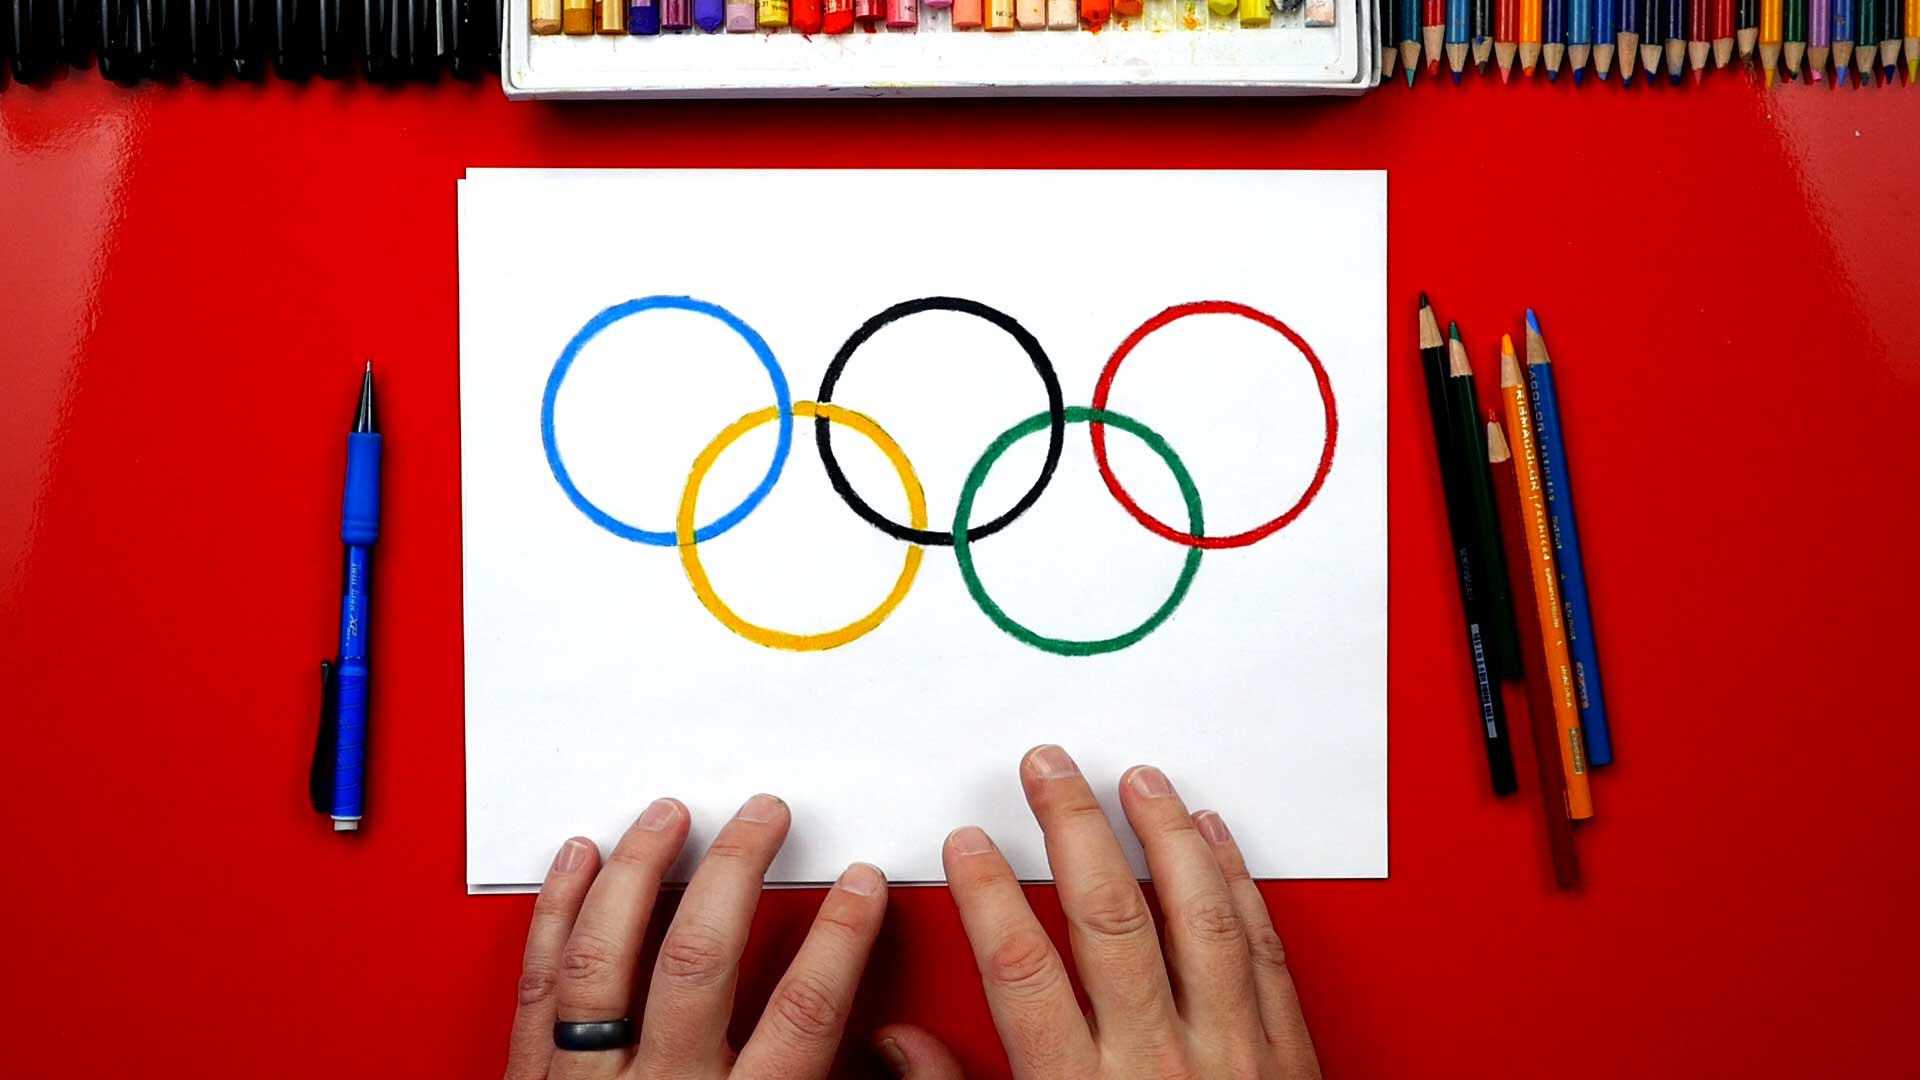 https://artforkidshub.com/wp-content/uploads/2018/02/How-To-Draw-The-Olympic-Rings-feature.jpg